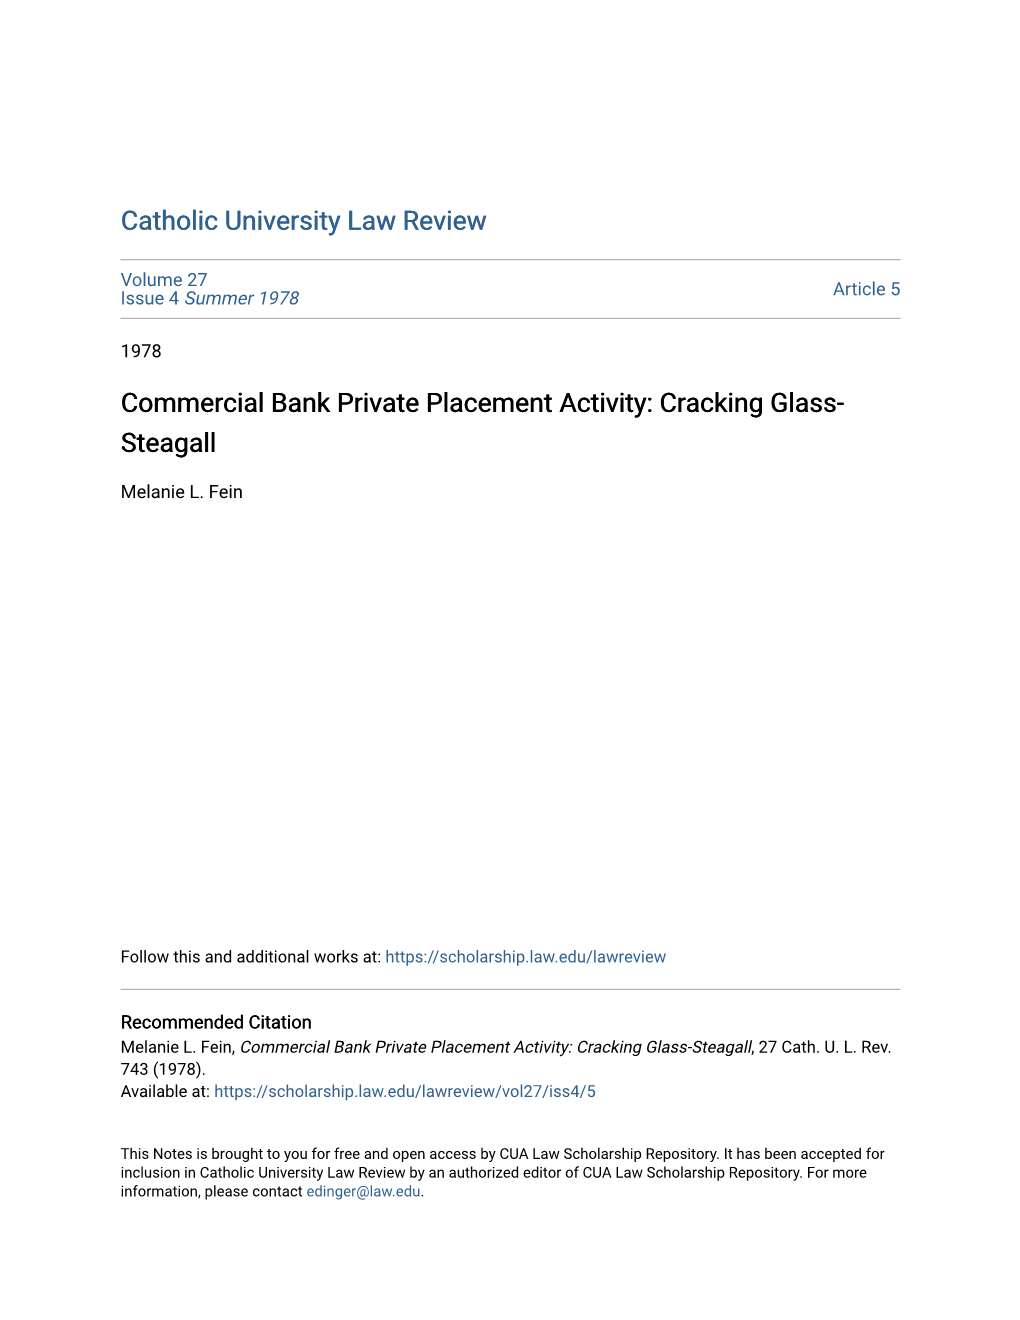 Commercial Bank Private Placement Activity: Cracking Glass-Steagall, 27 Cath